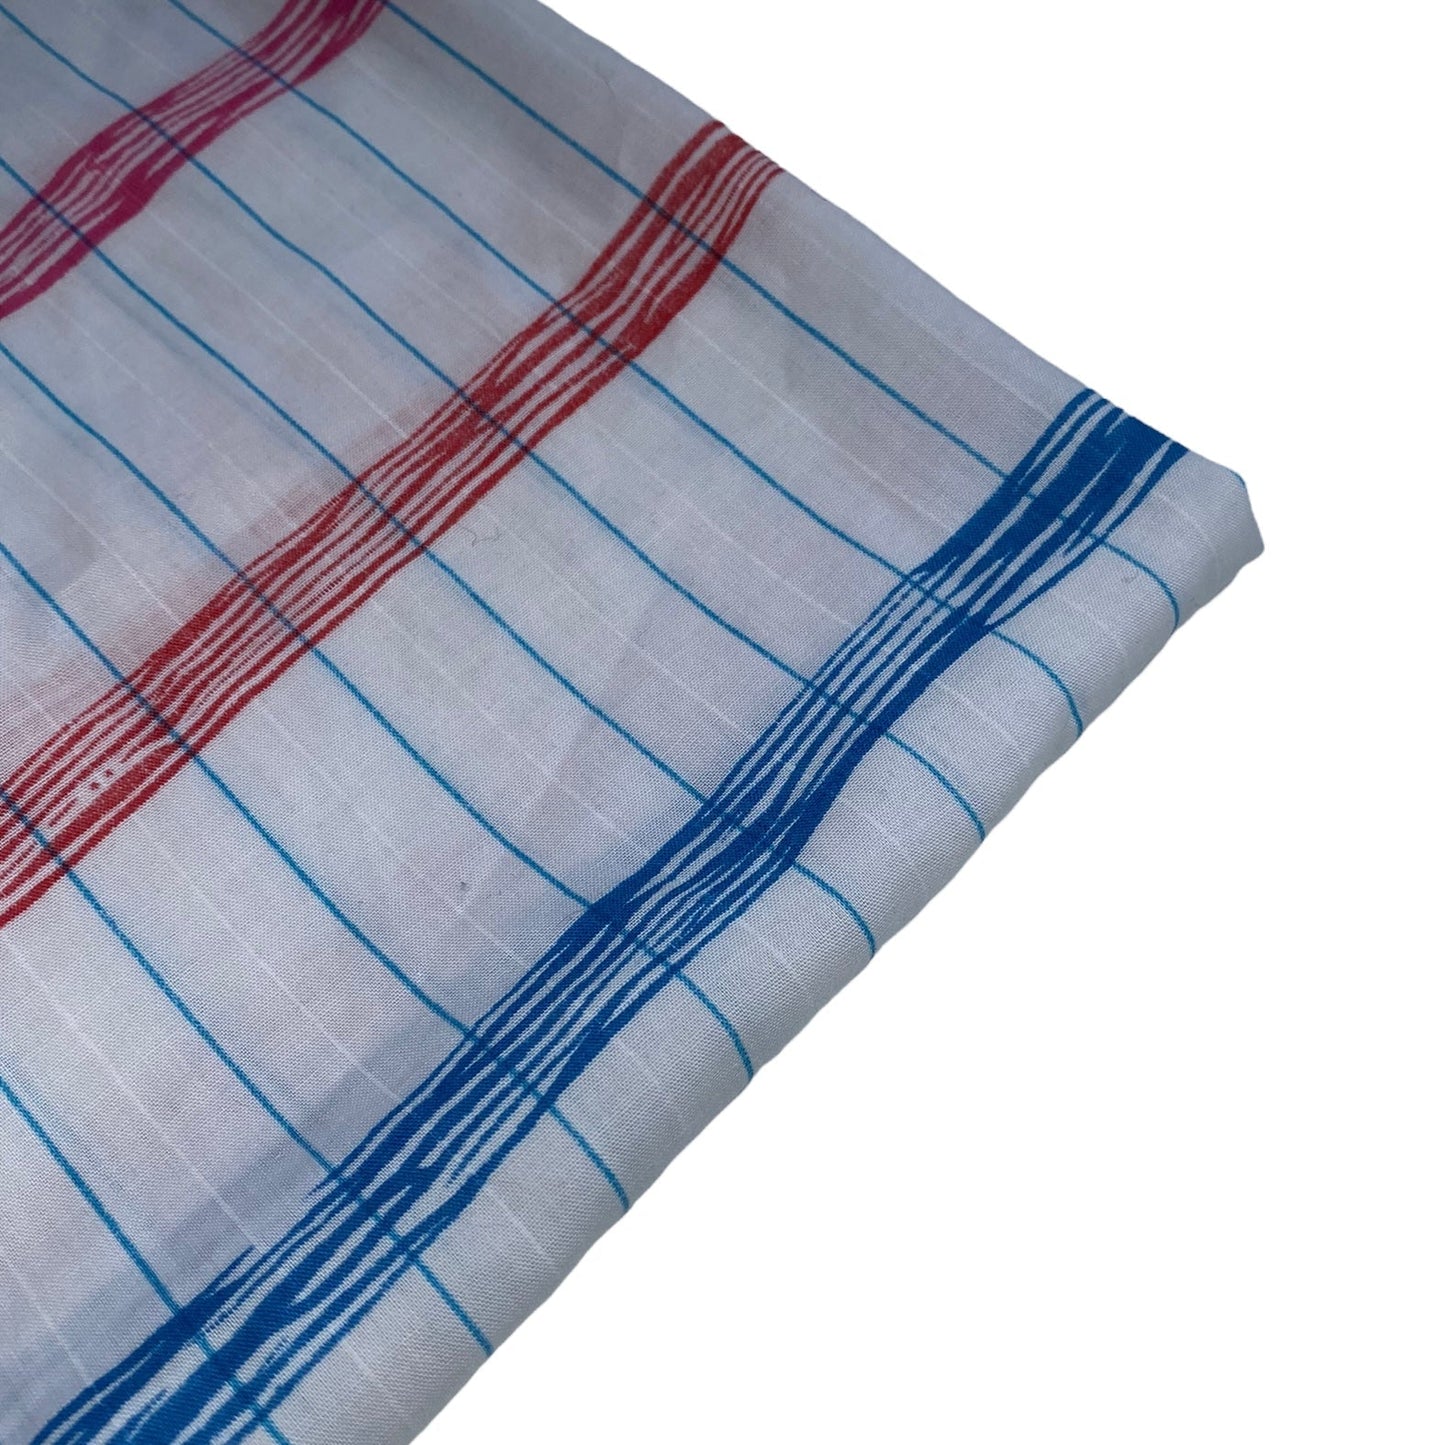 Striped Cotton/Polyester - 44” - White/Blue/Pink/Red